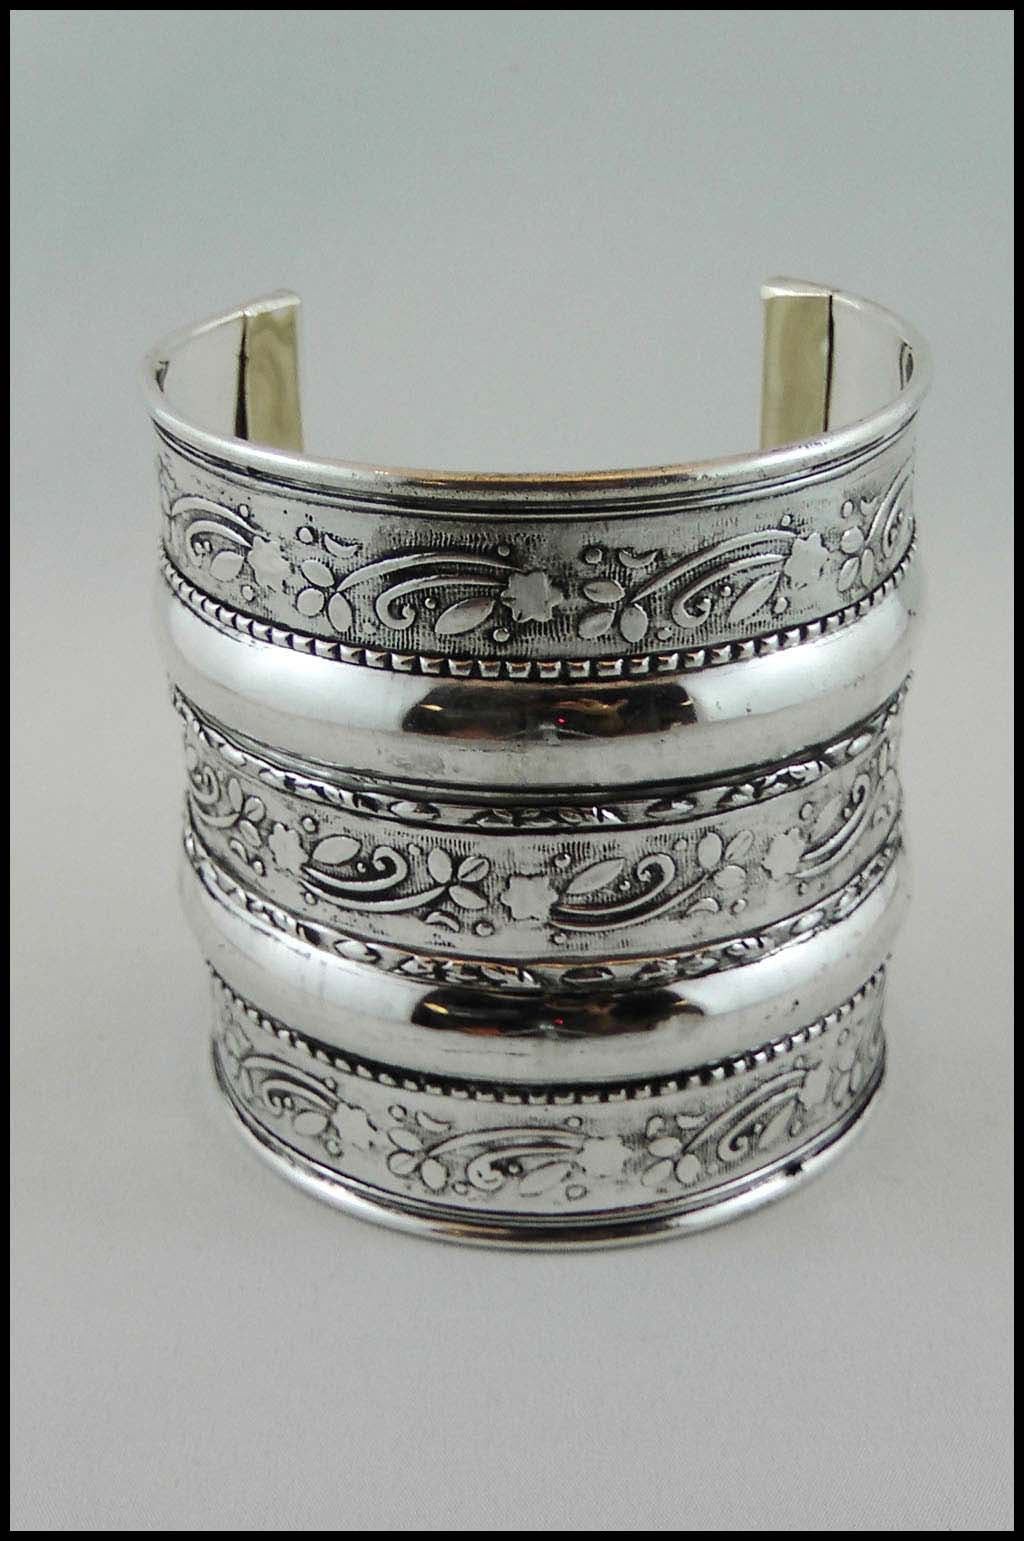 Patterned Metal Arm Cuff